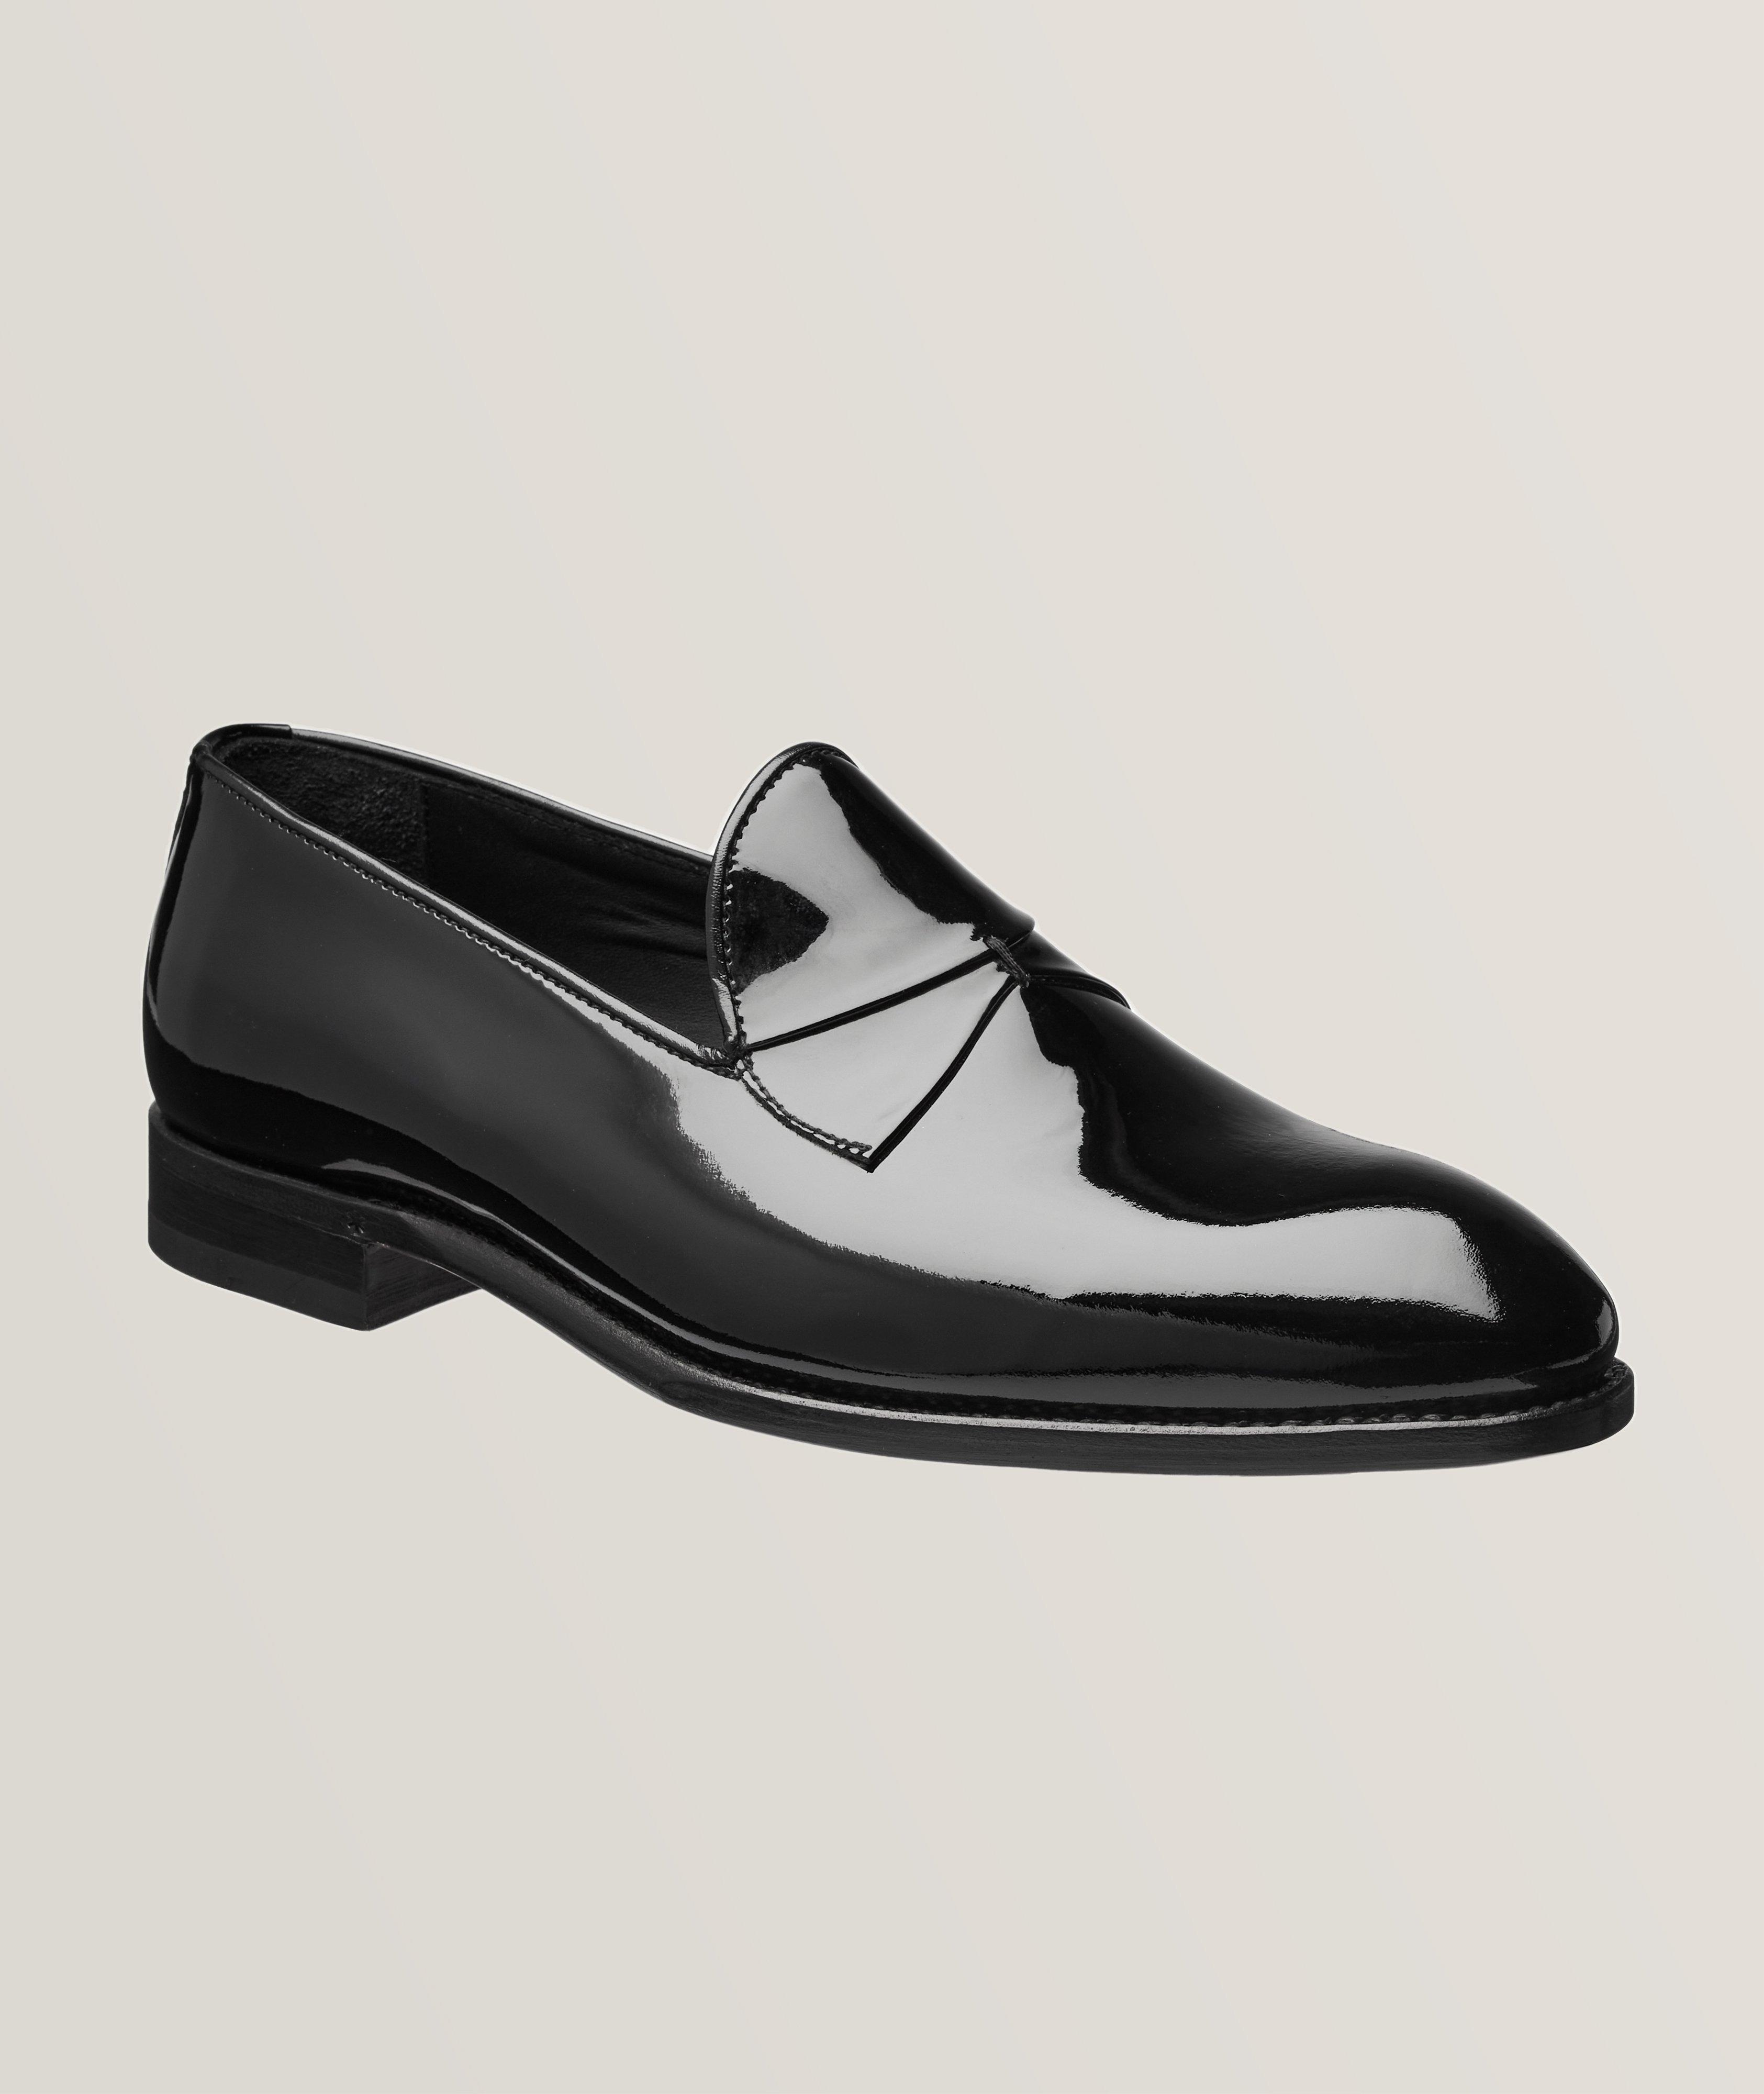 Passetto Patent Leather Loafer  image 0